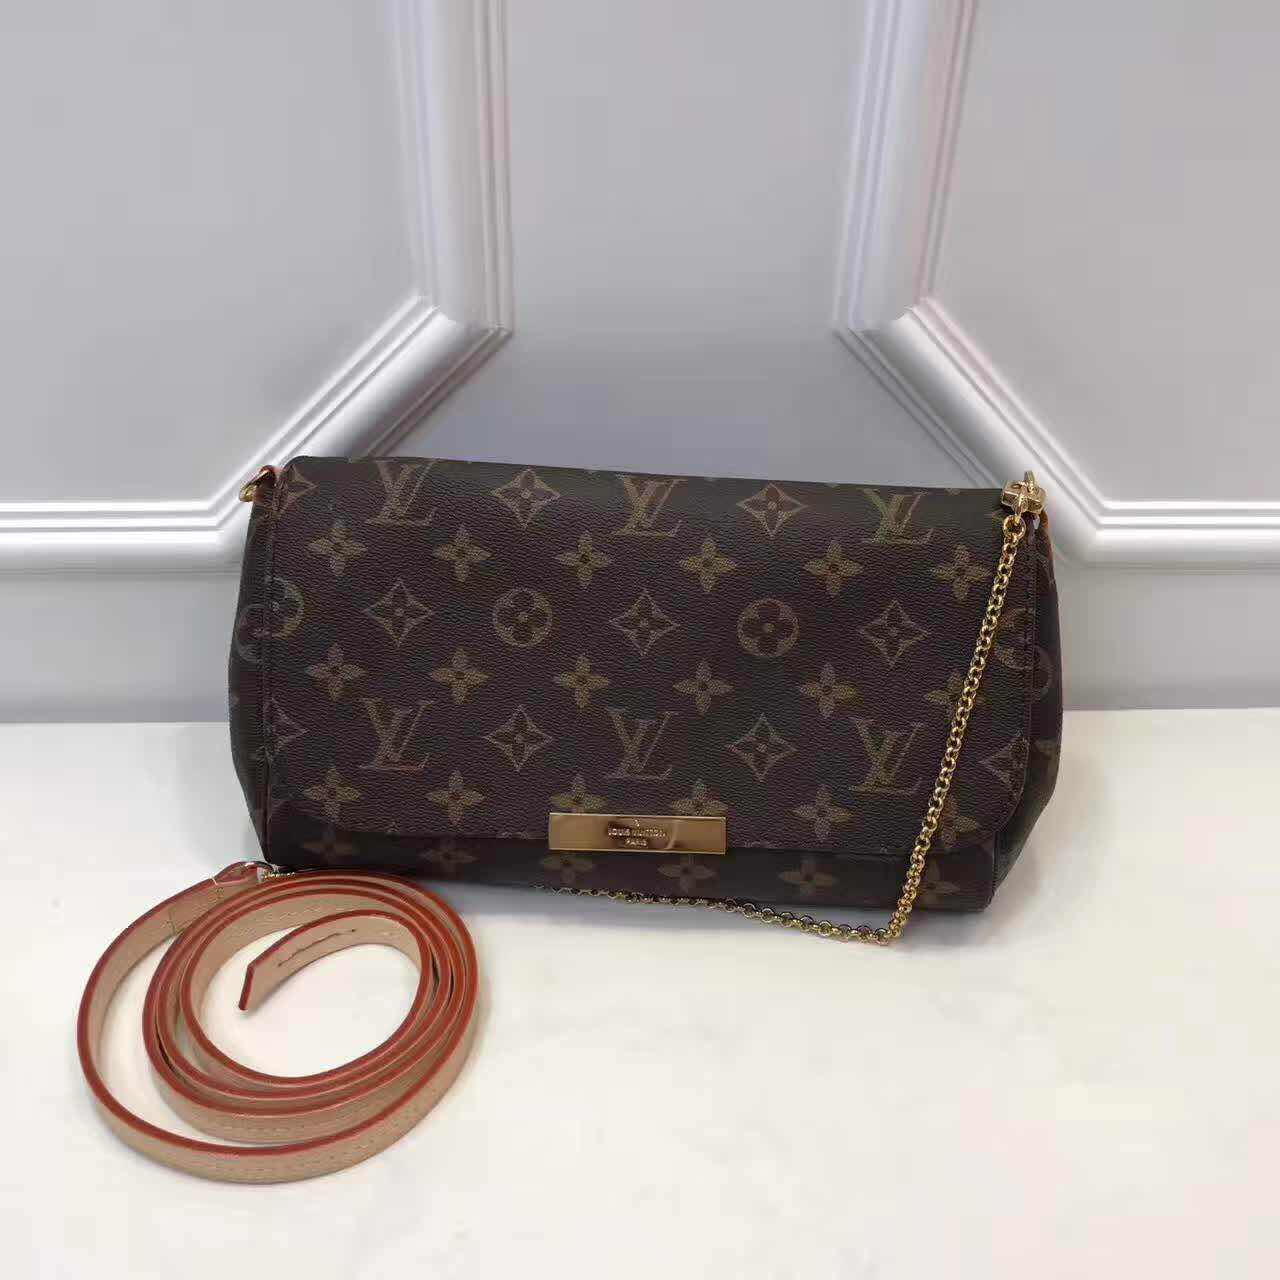 LV Fovotite MM bag with red inside